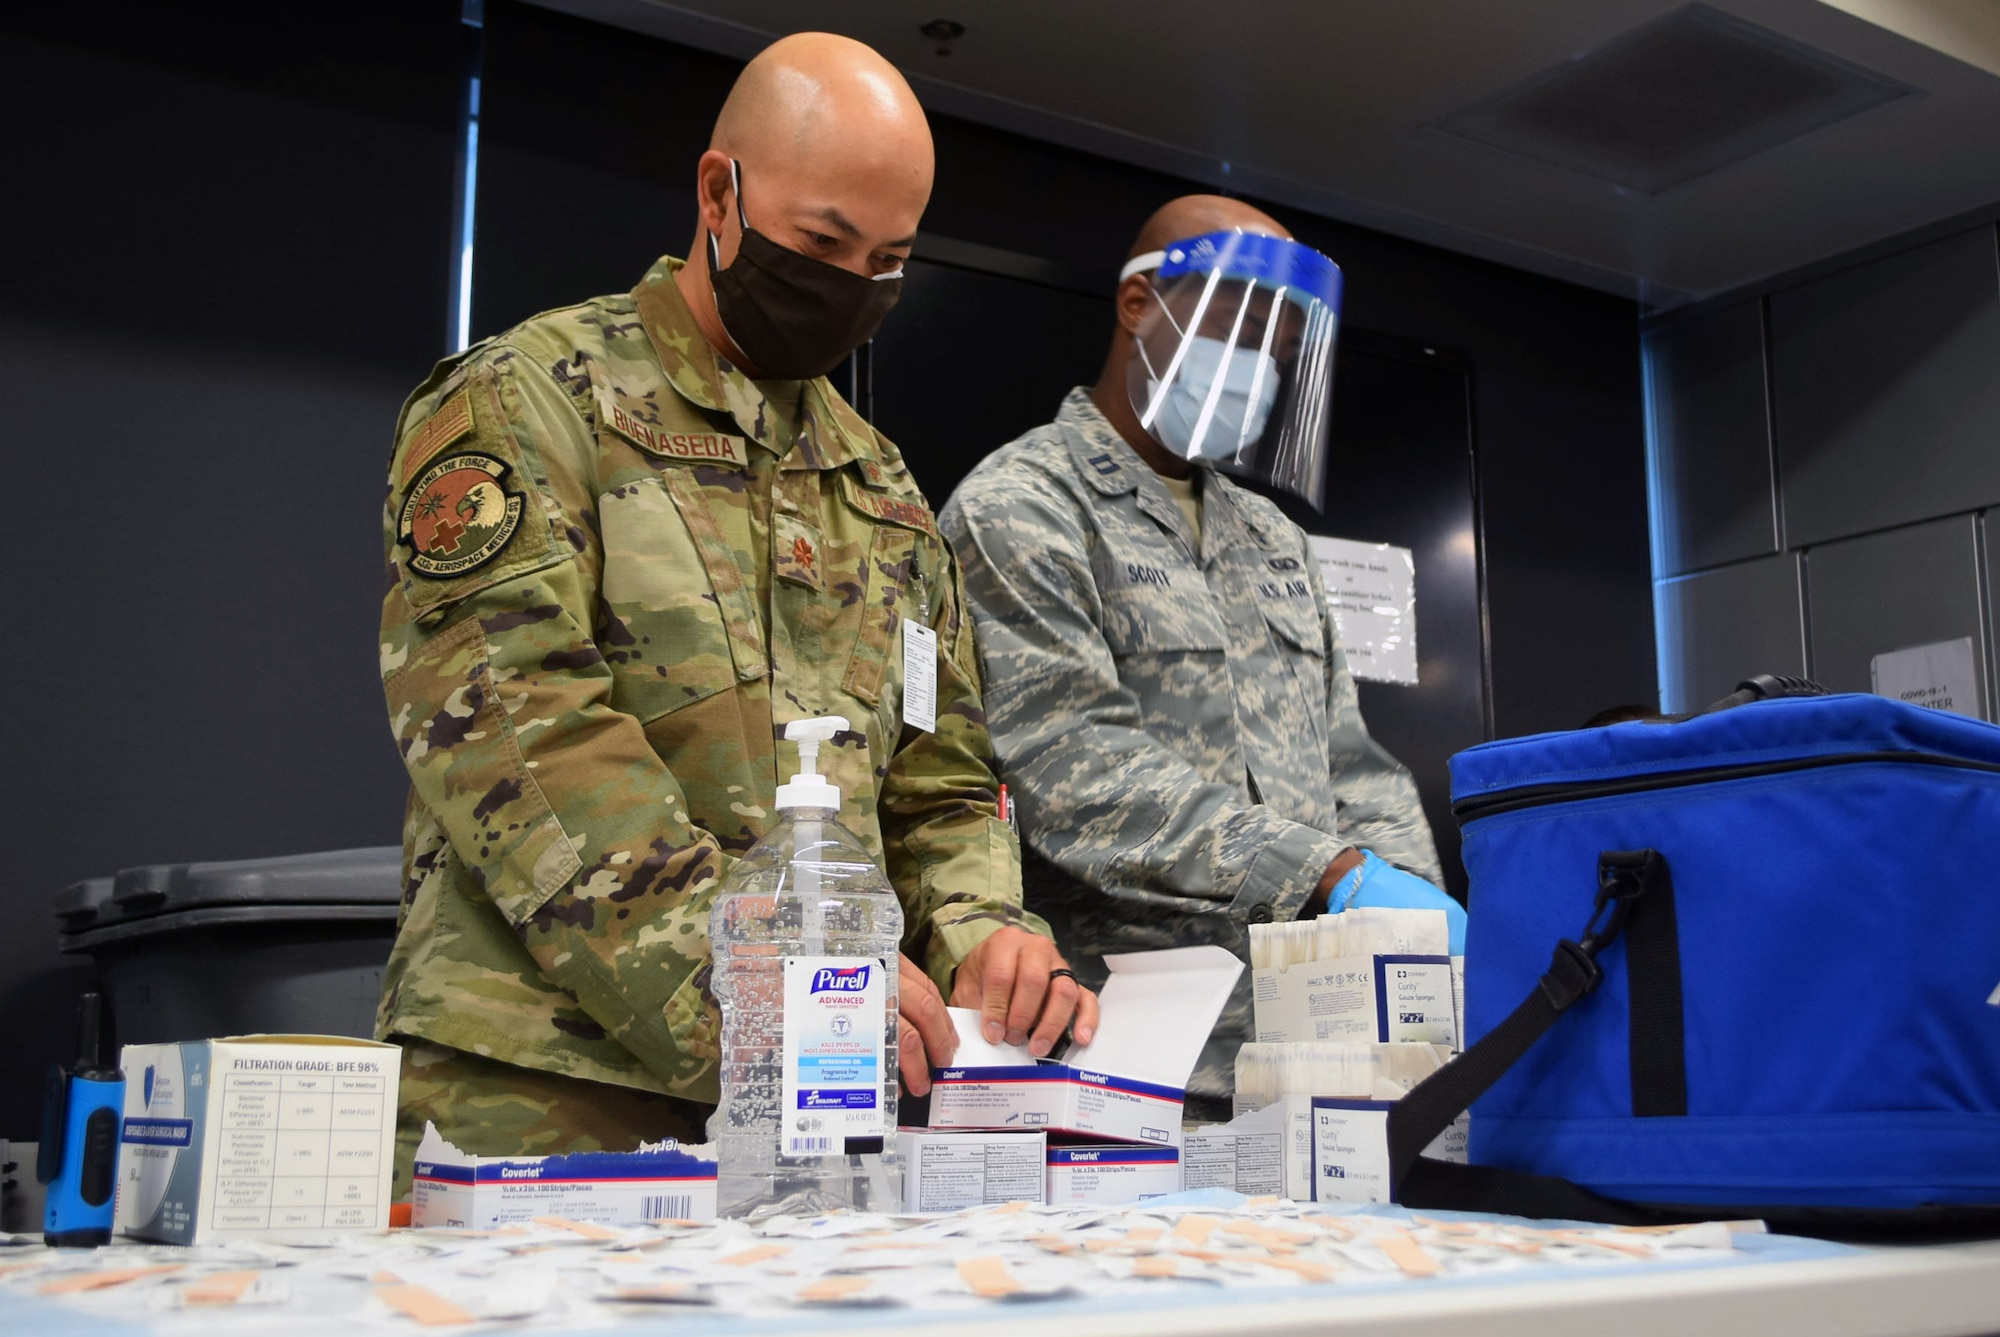 Maj. Jerry Buenaseda, 433rd Aerospace Medicine Squadron clinical nurse, and Capt. Albert Scott Jr., 433rd Medical Squadron critical care nurse, prepare to distribute the COVID-19 vaccine to 433rd Airlift Wing members at Joint Base San Antonio-Lackland, Texas March 7, 2021. The COVID-19 vaccination rollout took a year in planning, strategizing, and training personnel. (U.S. Air Force photo by Tech Sgt. Mike Lahrman)